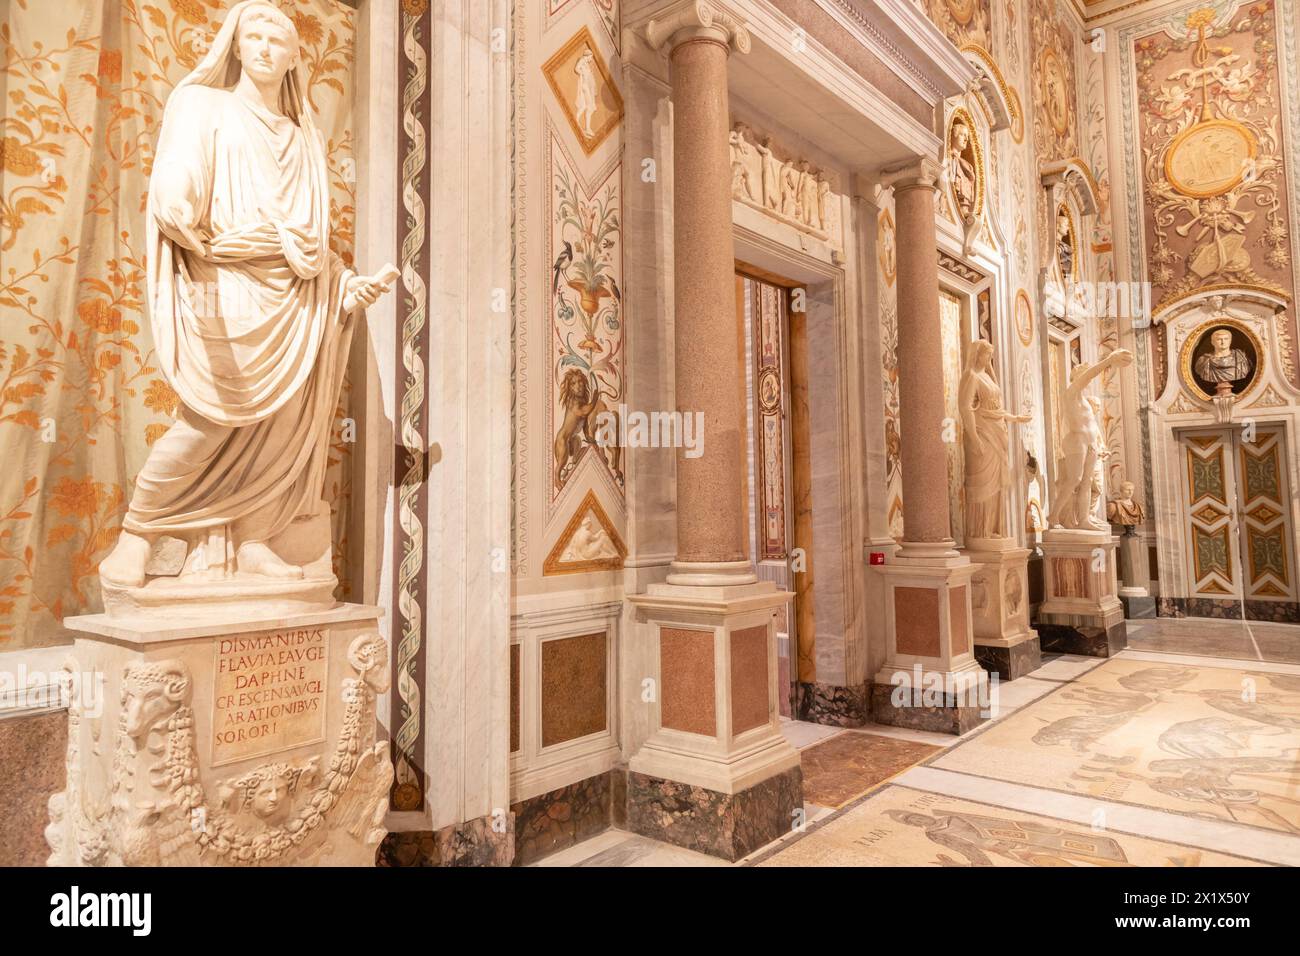 Rome, Italy - 28 December 2023: Galleria Borghese - Borghese Gallery - ancient art museum interior, sculptures in white marble Stock Photo